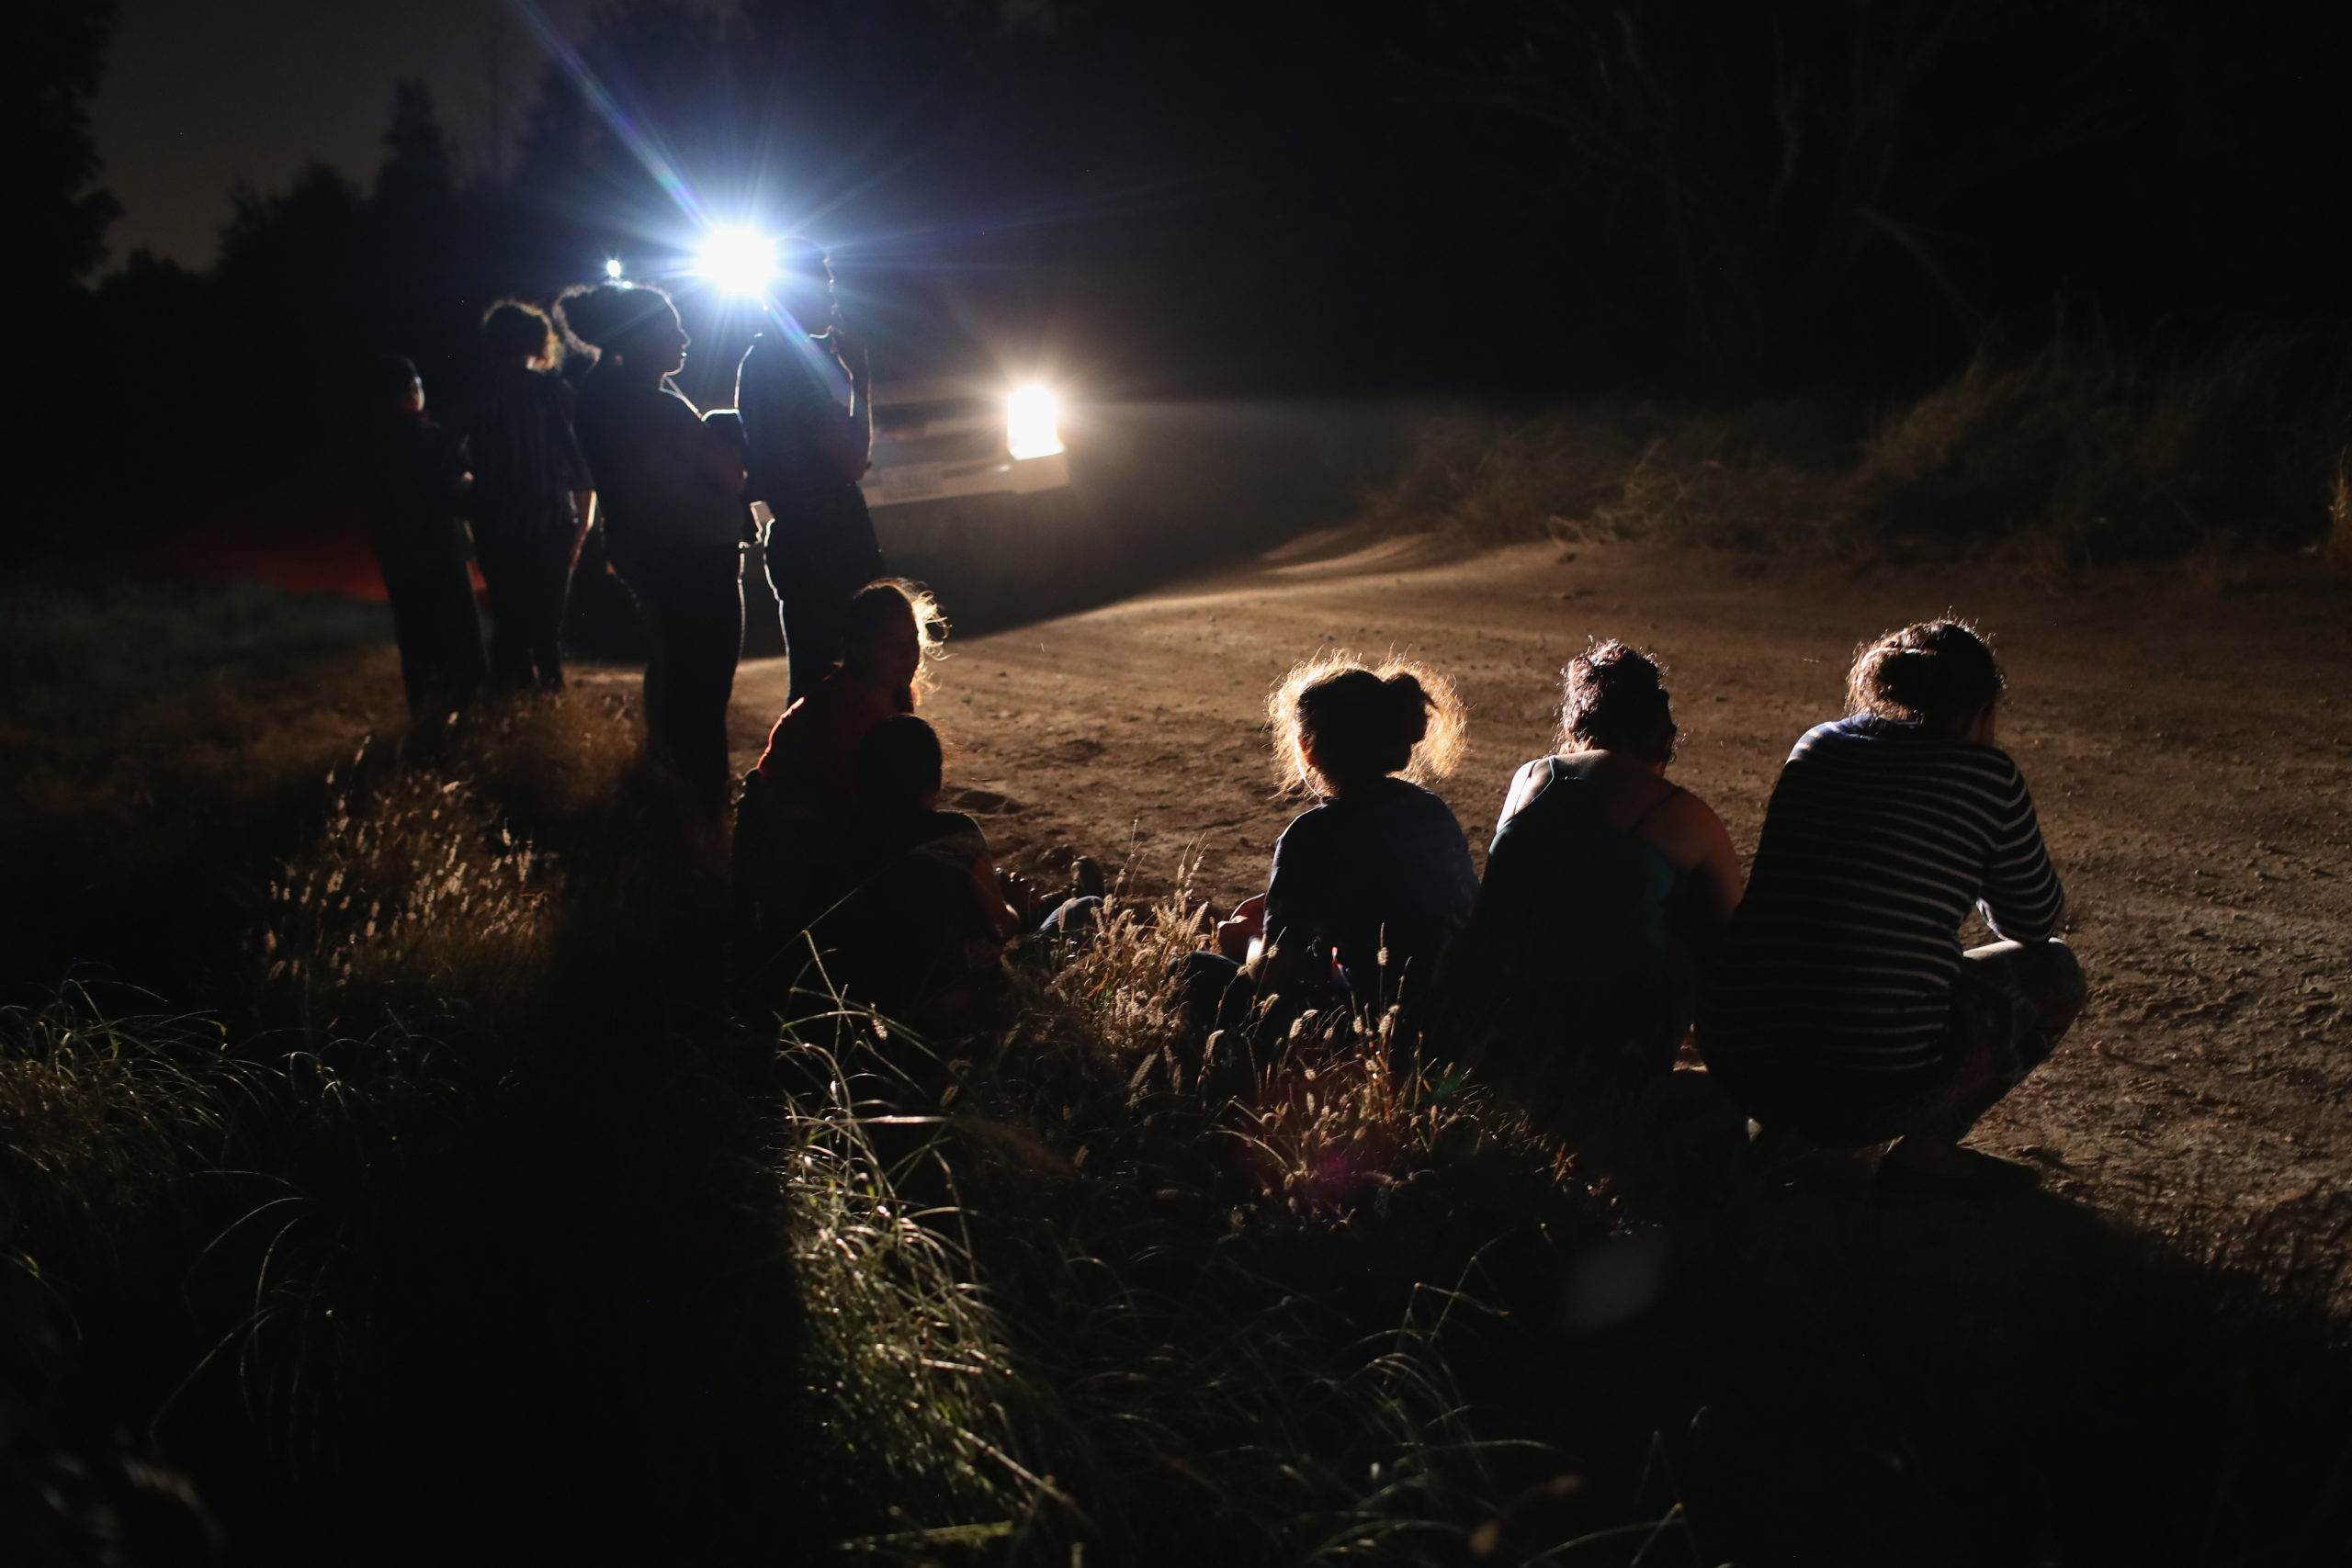 MCALLEN, TX - JUNE 12: A U.S. Border Patrol vehicle illuminates a group of Central American asylum seekers before taking them into custody near the U.S.-Mexico border on June 12, 2018 in McAllen, Texas. The group of women and children had rafted across the Rio Grande from Mexico and were detained by U.S. Border Patrol agents before being sent to a processing center for possible separation. Customs and Border Protection (CBP) is executing the Trump administration's zero tolerance policy towards undocumented immigrants. U.S. Attorney General Jeff Sessions also said that domestic and gang violence in immigrants' country of origin would no longer qualify them for political asylum status. (Photo by John Moore/Getty Images)